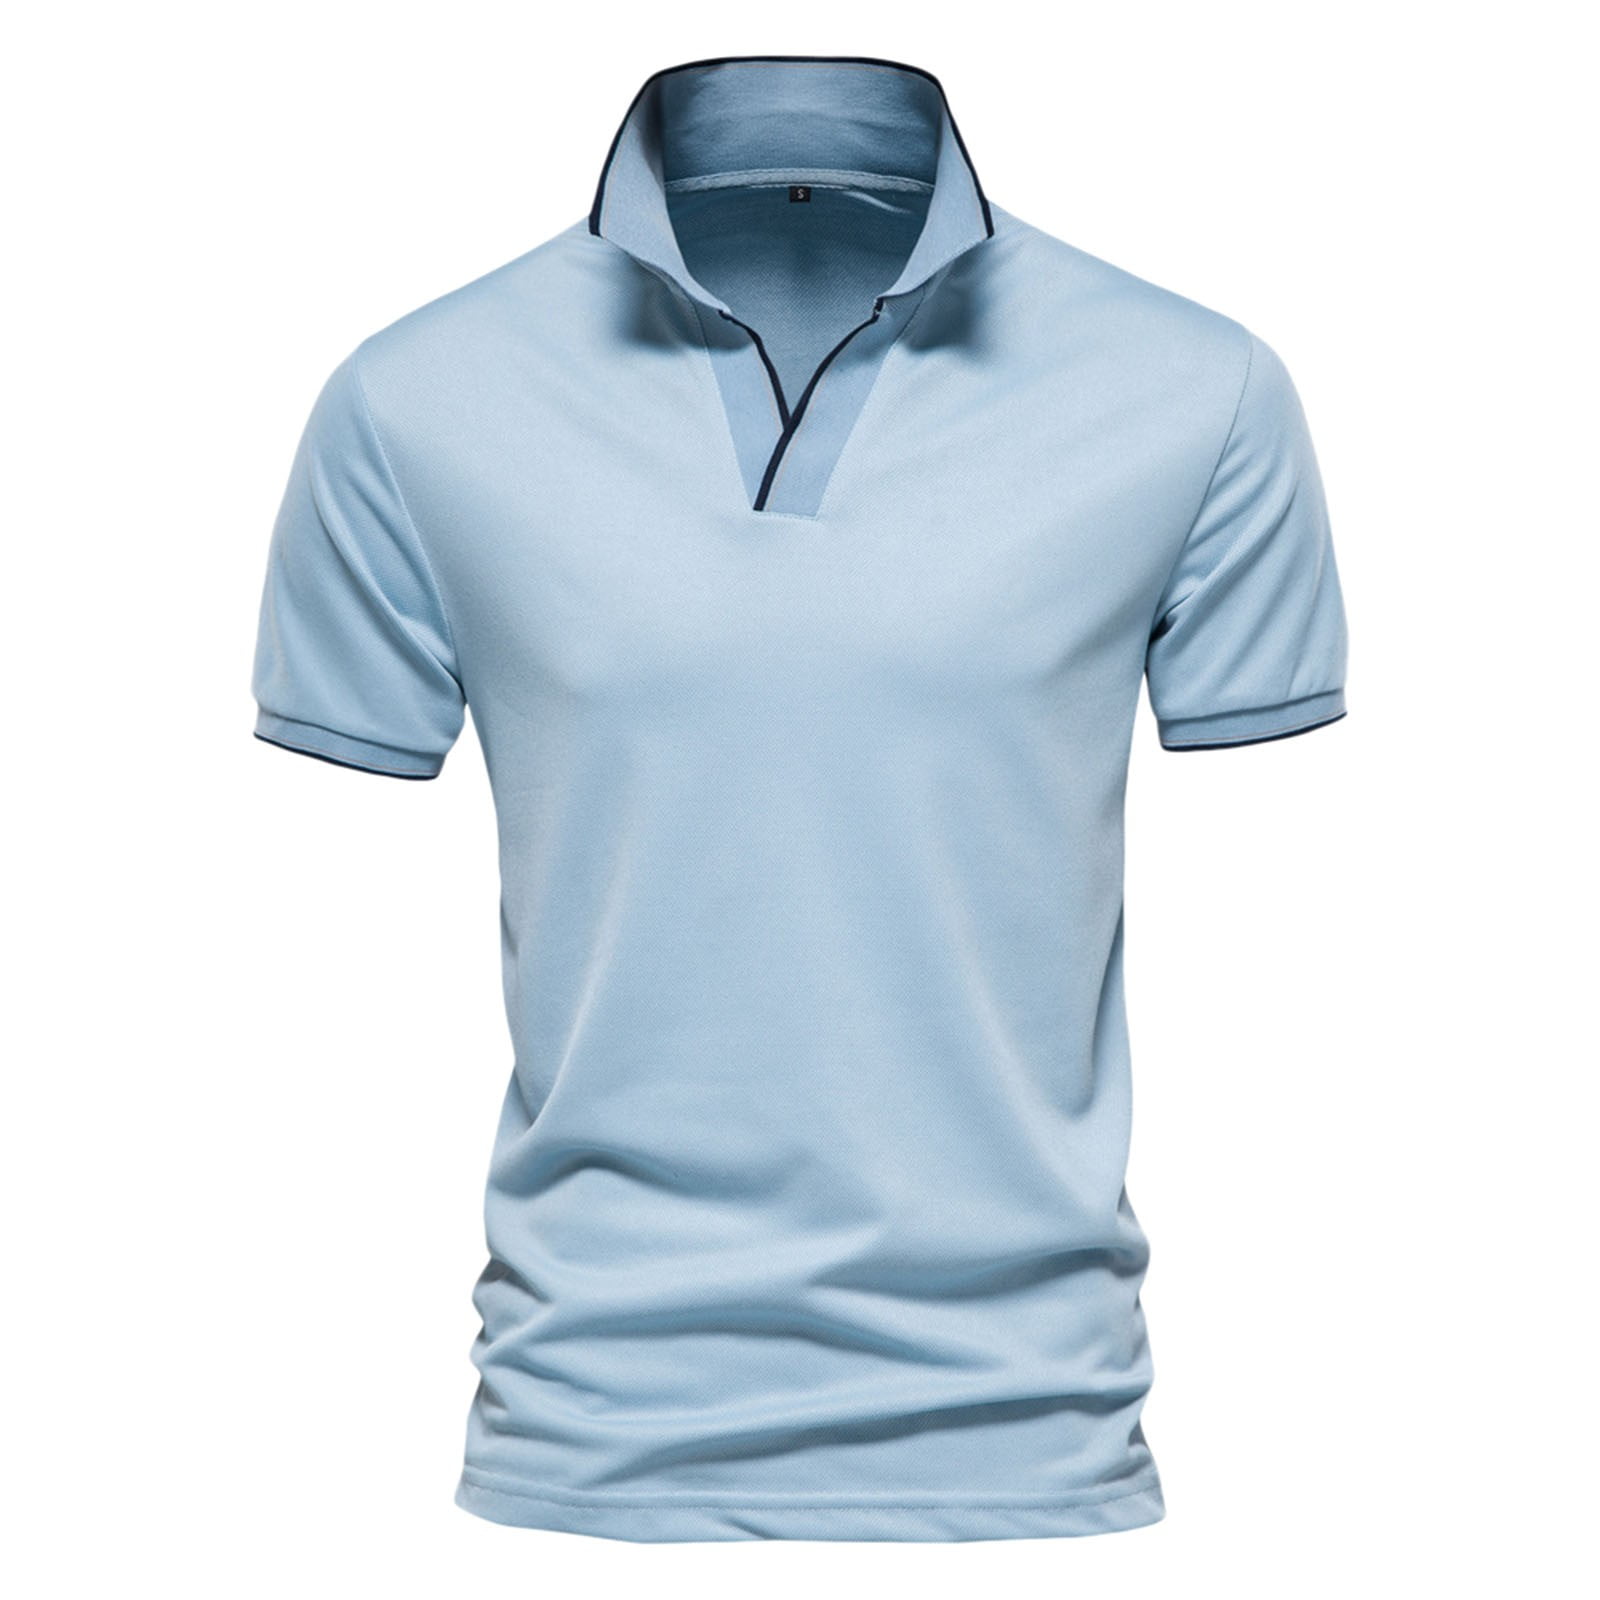 Light Blue Polo T Shirts For Men Mens Fashion Casual Solid Color Cotton V  Neck Button Short Sleeve T Shirt Top